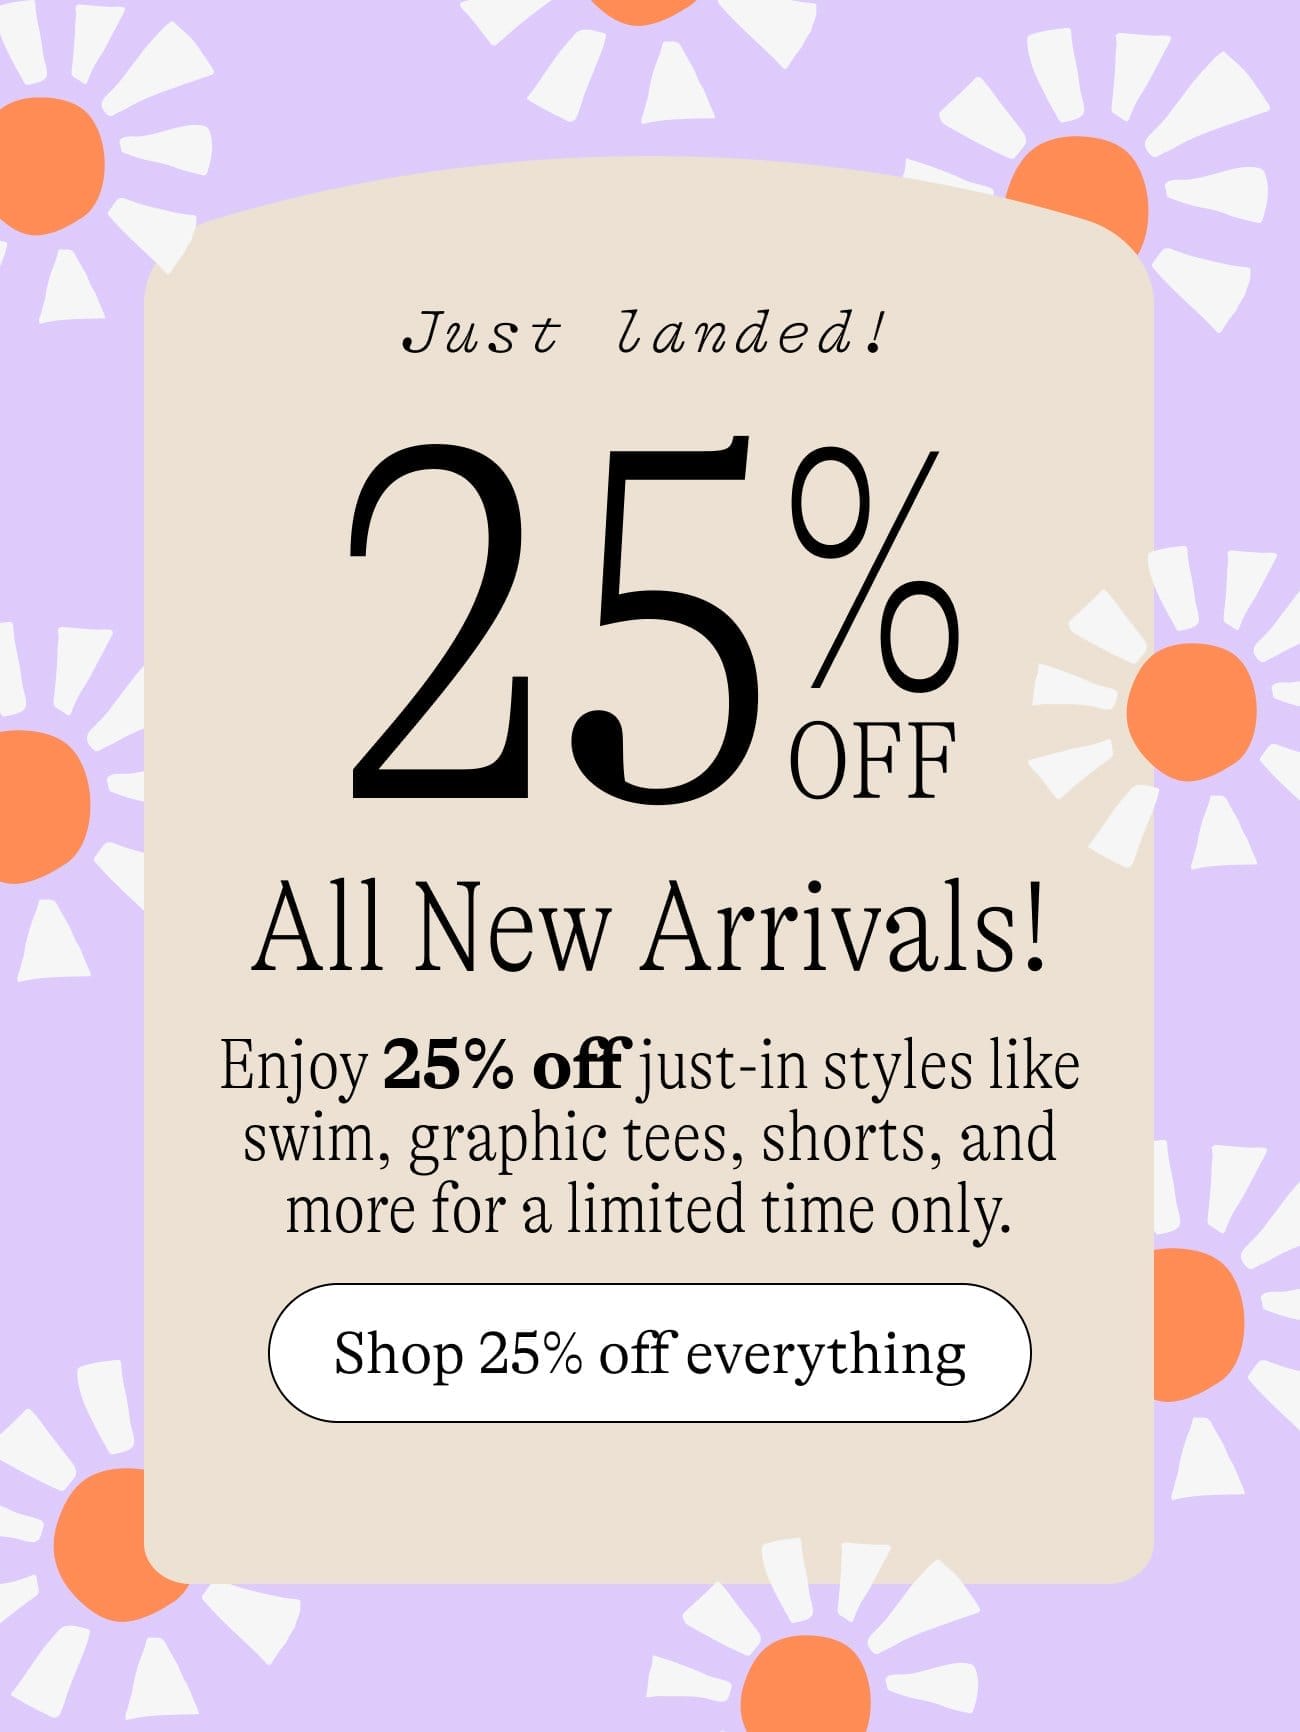 Just Landed! 20% OFF All New Arrivals / Enjoy 25% off just-in styles like swim, graphic tees, shorts, and more for a limited time only. Shop 25% off everything